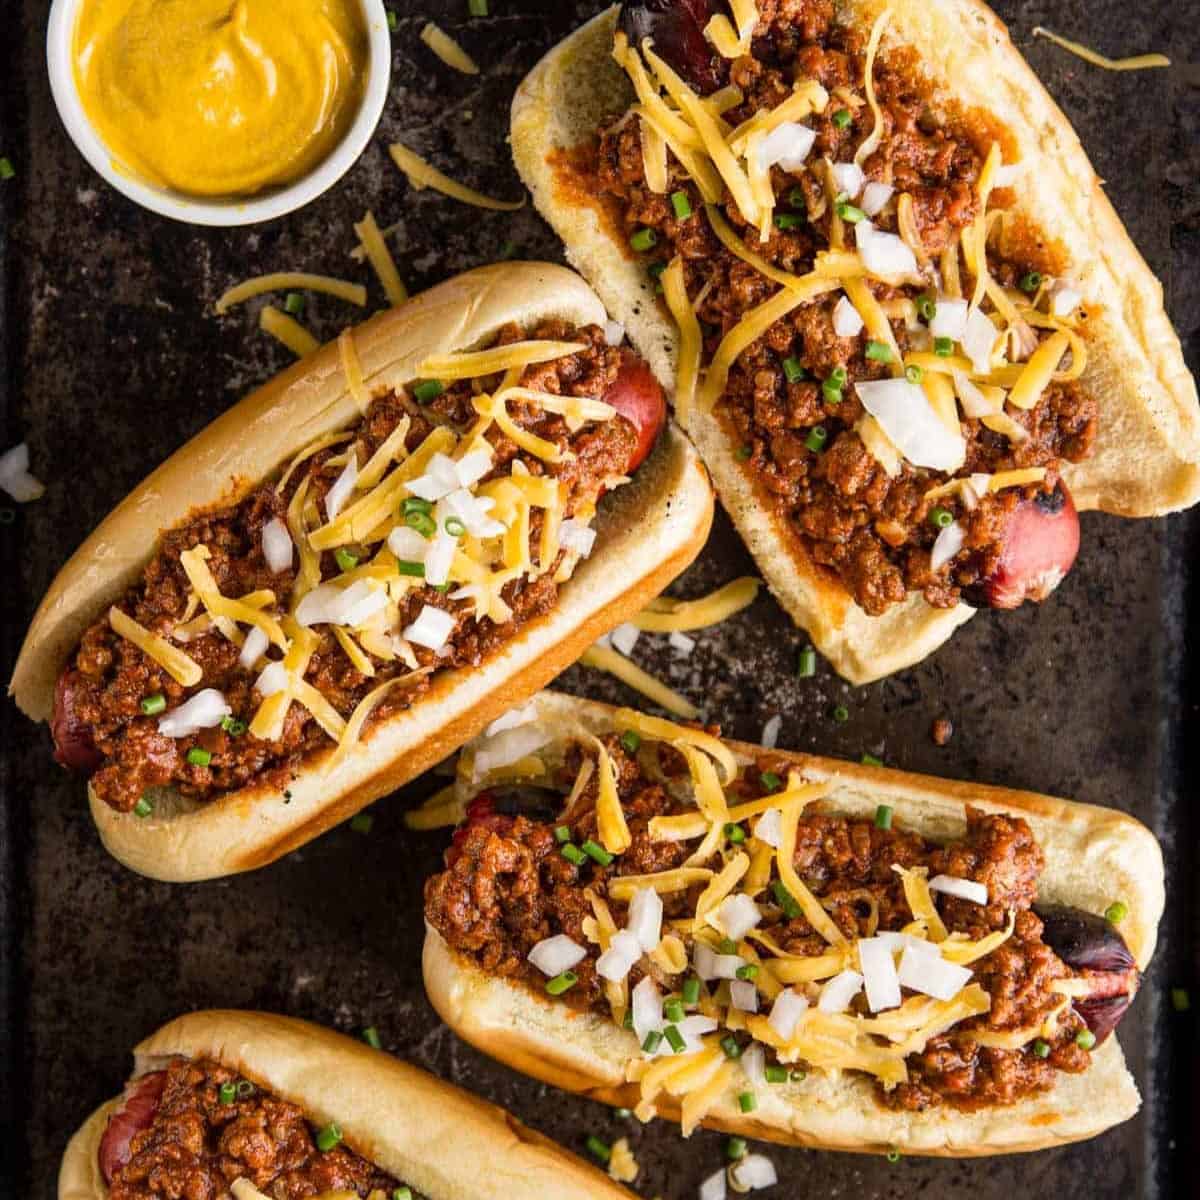 Hot Dog Condiments and Toppings Guide + Martin's Featured Recipe